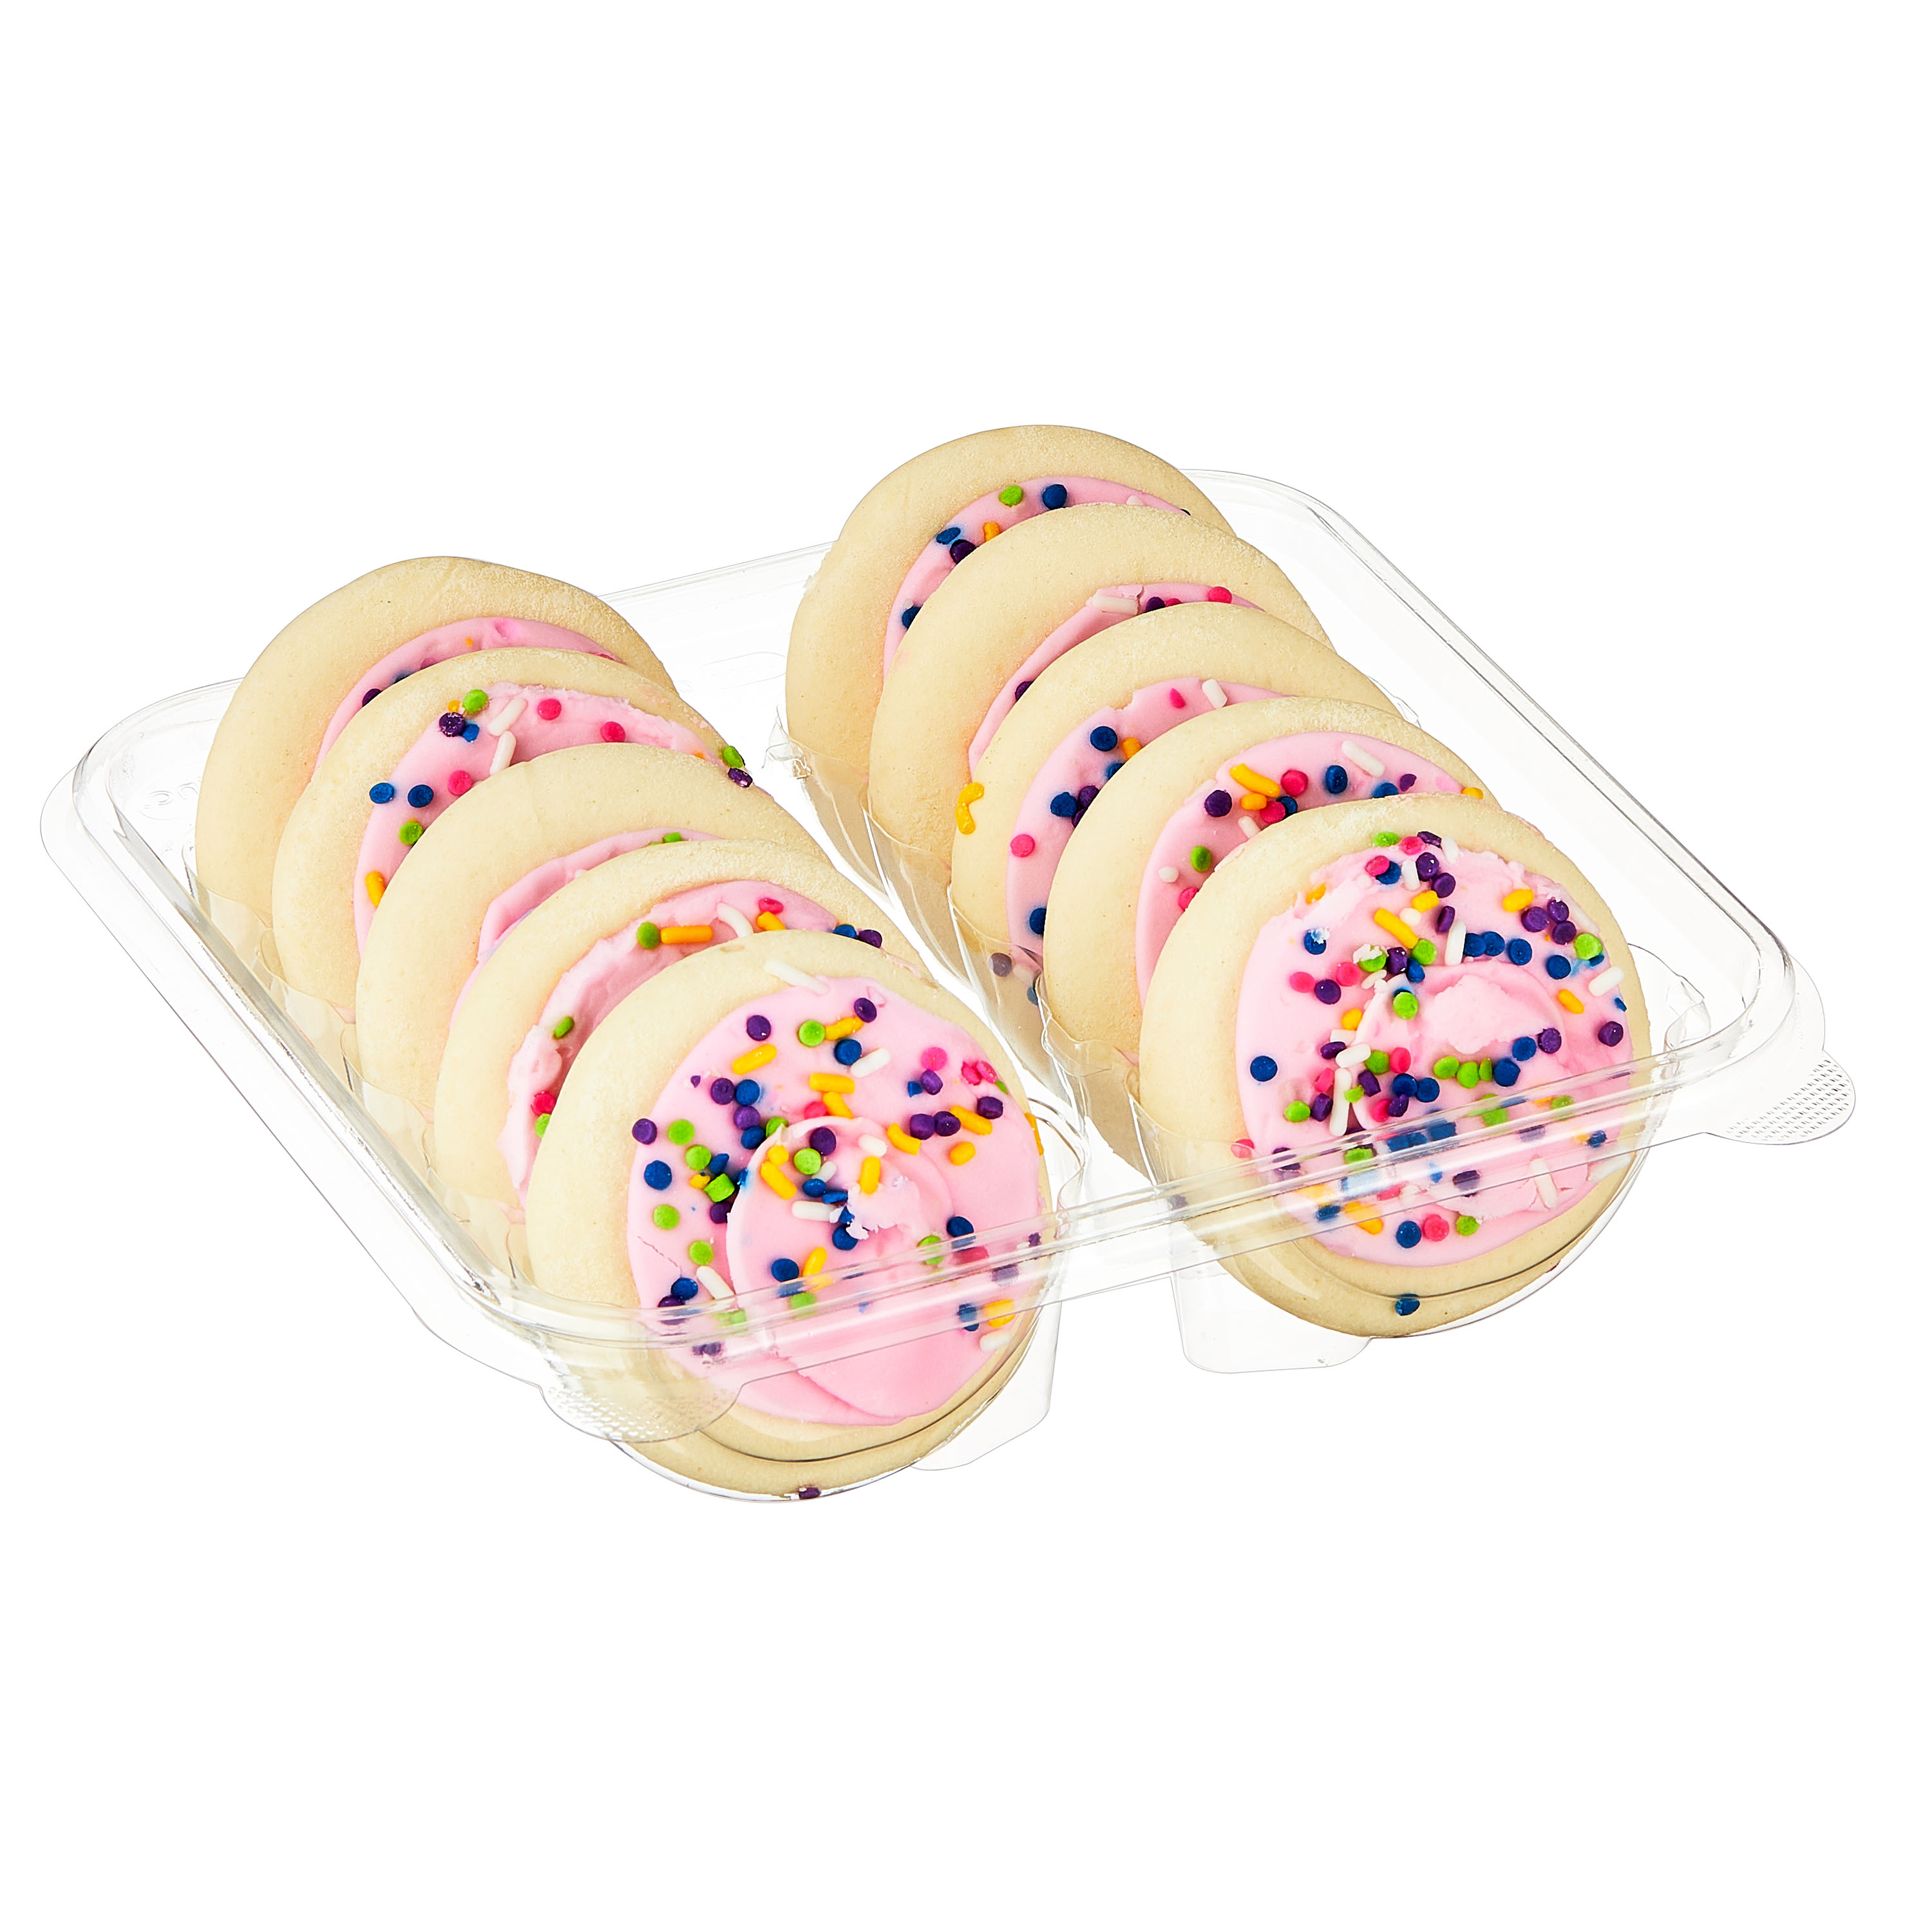 Freshness Guaranteed Frosted Sugar Cookies, Pink, 13.5 oz, 10 Count, Shelf-Stable/Ambient, Whole - image 1 of 9